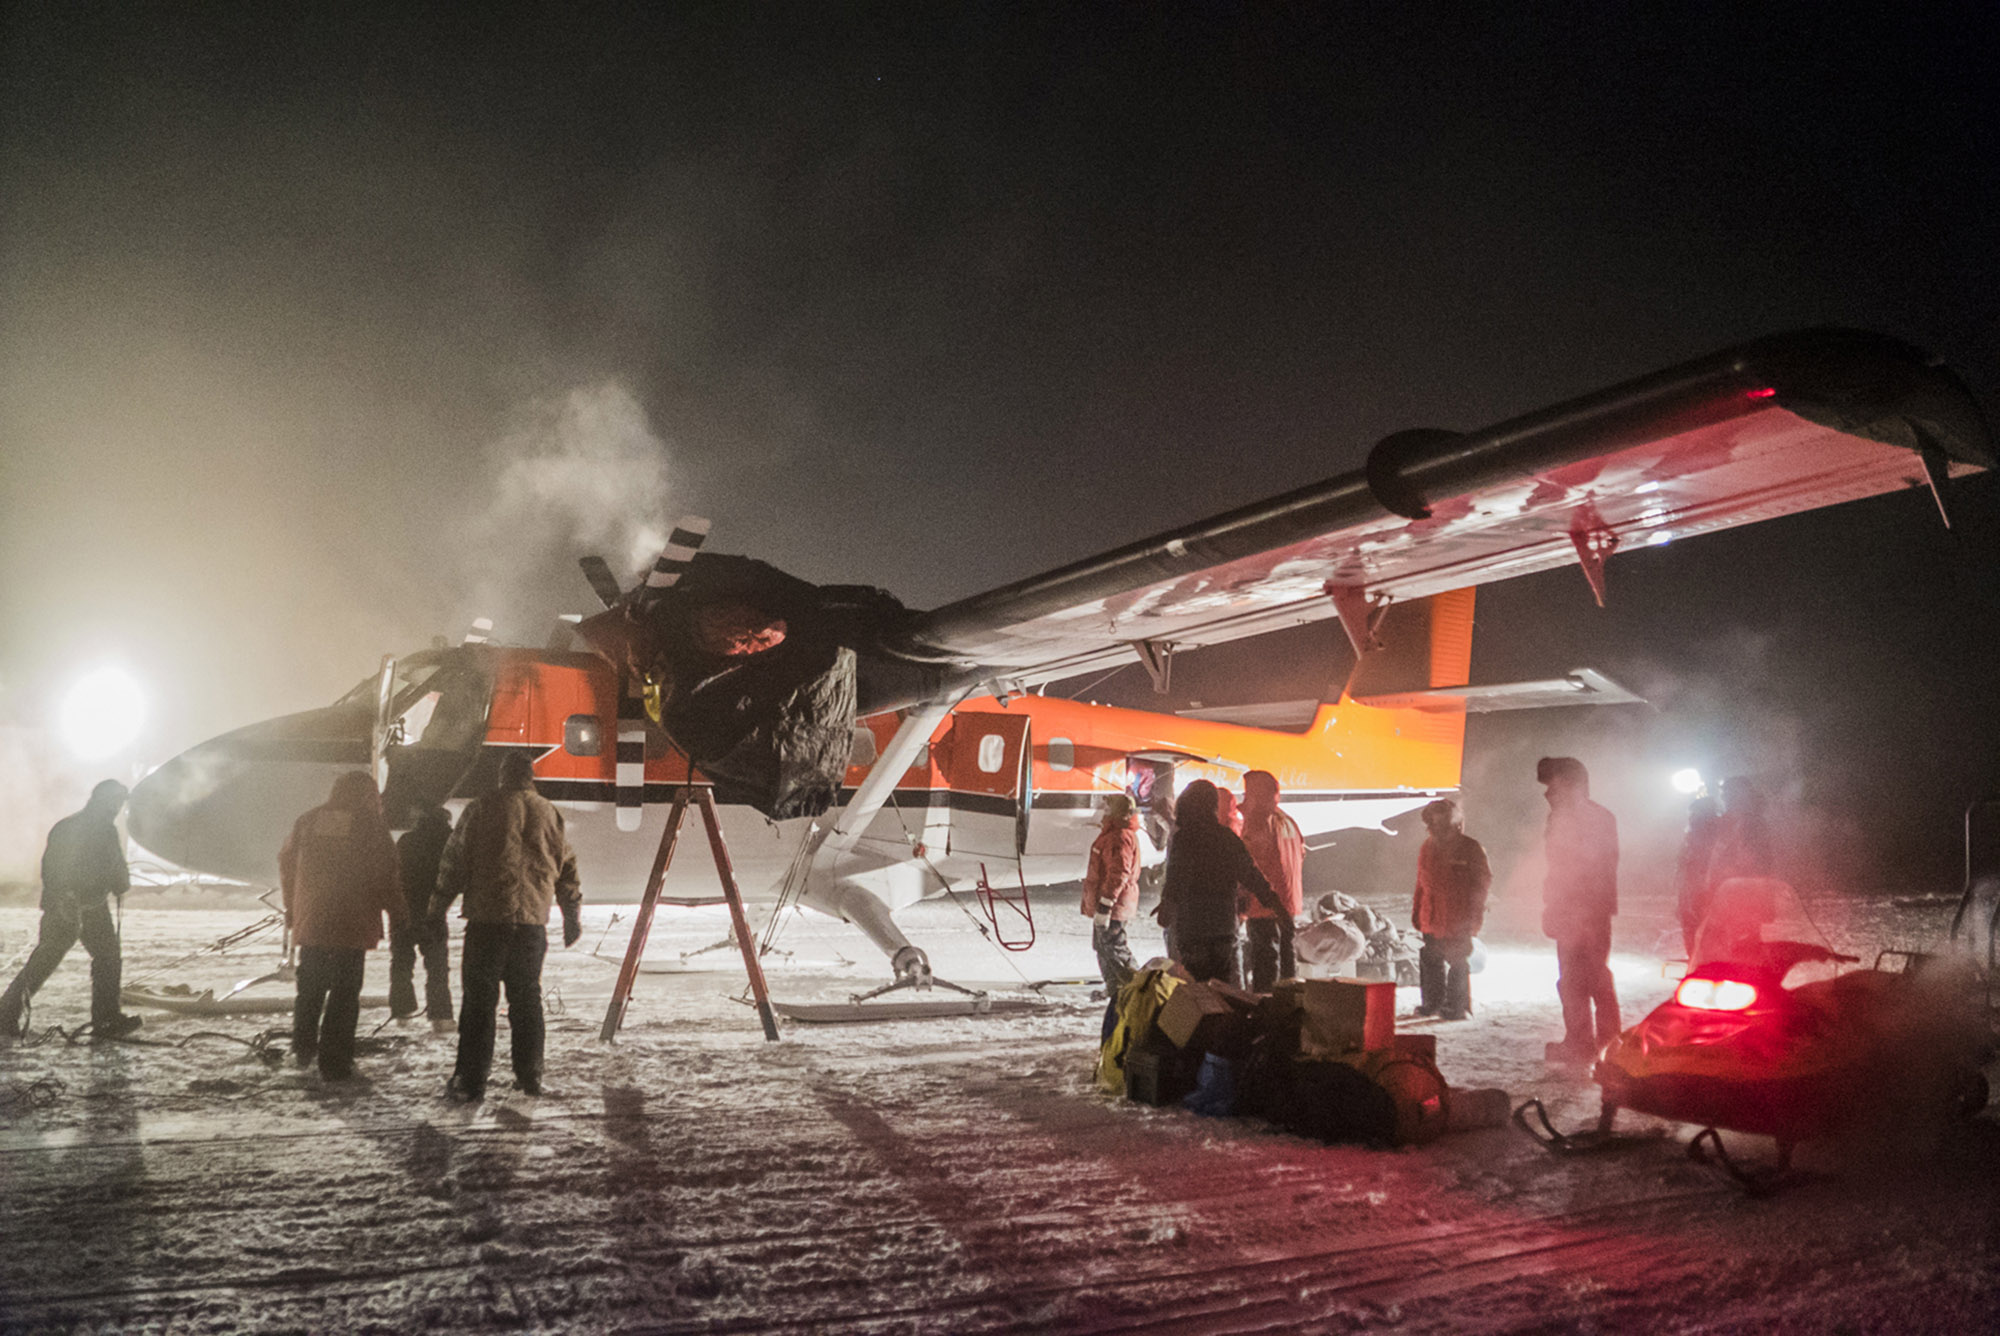 PHOTO: A small plane picks up 2 patients at the U.S. South Pole science station during a rescue attempt to get the crew members needed medical attention.